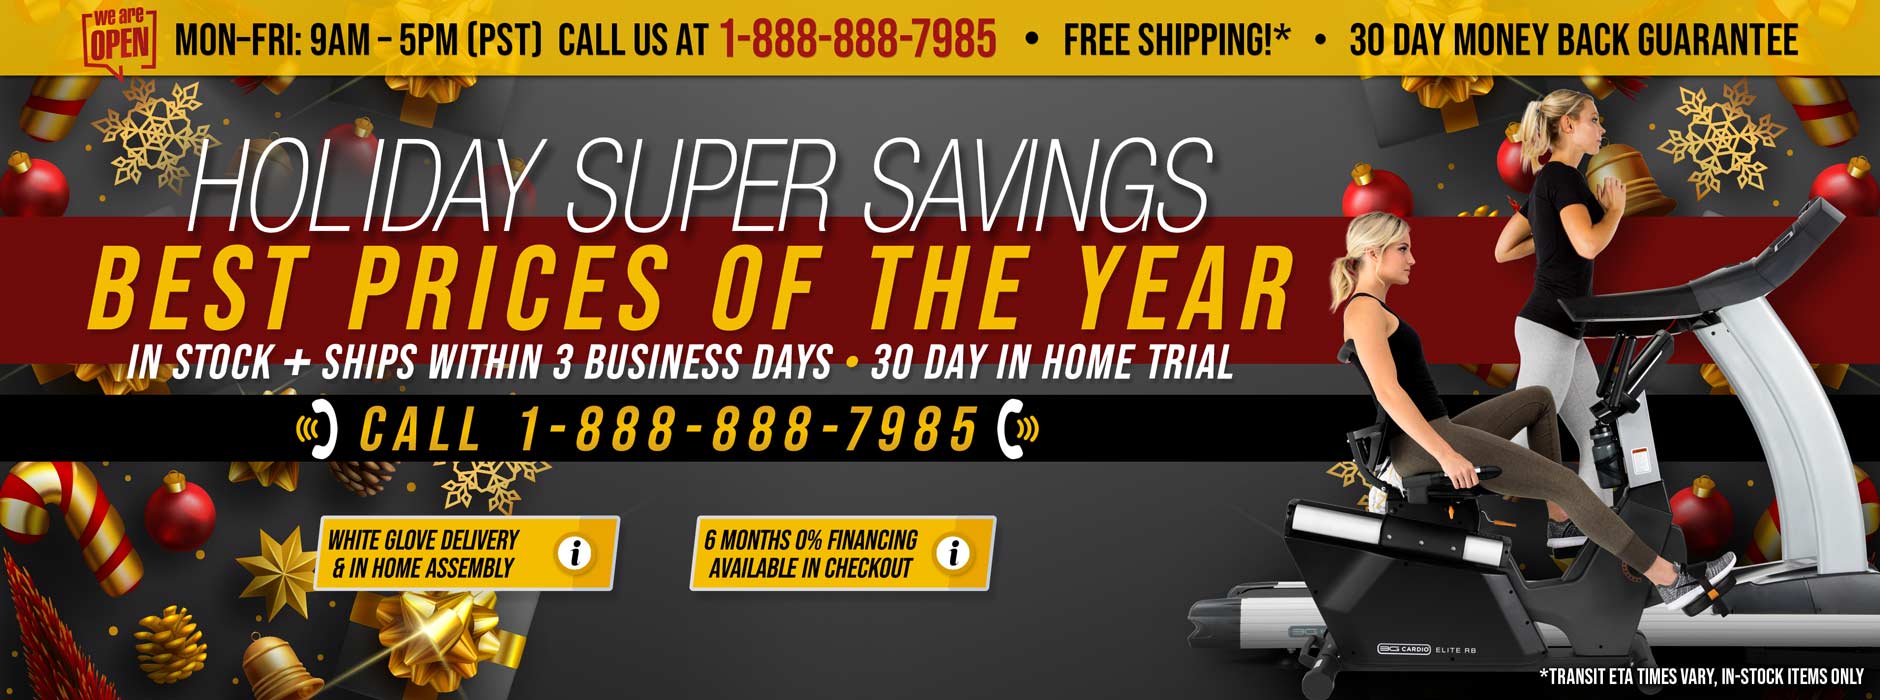 3GCardio.com Holiday Super Sale on now - Best Prices of the Year - Call Today